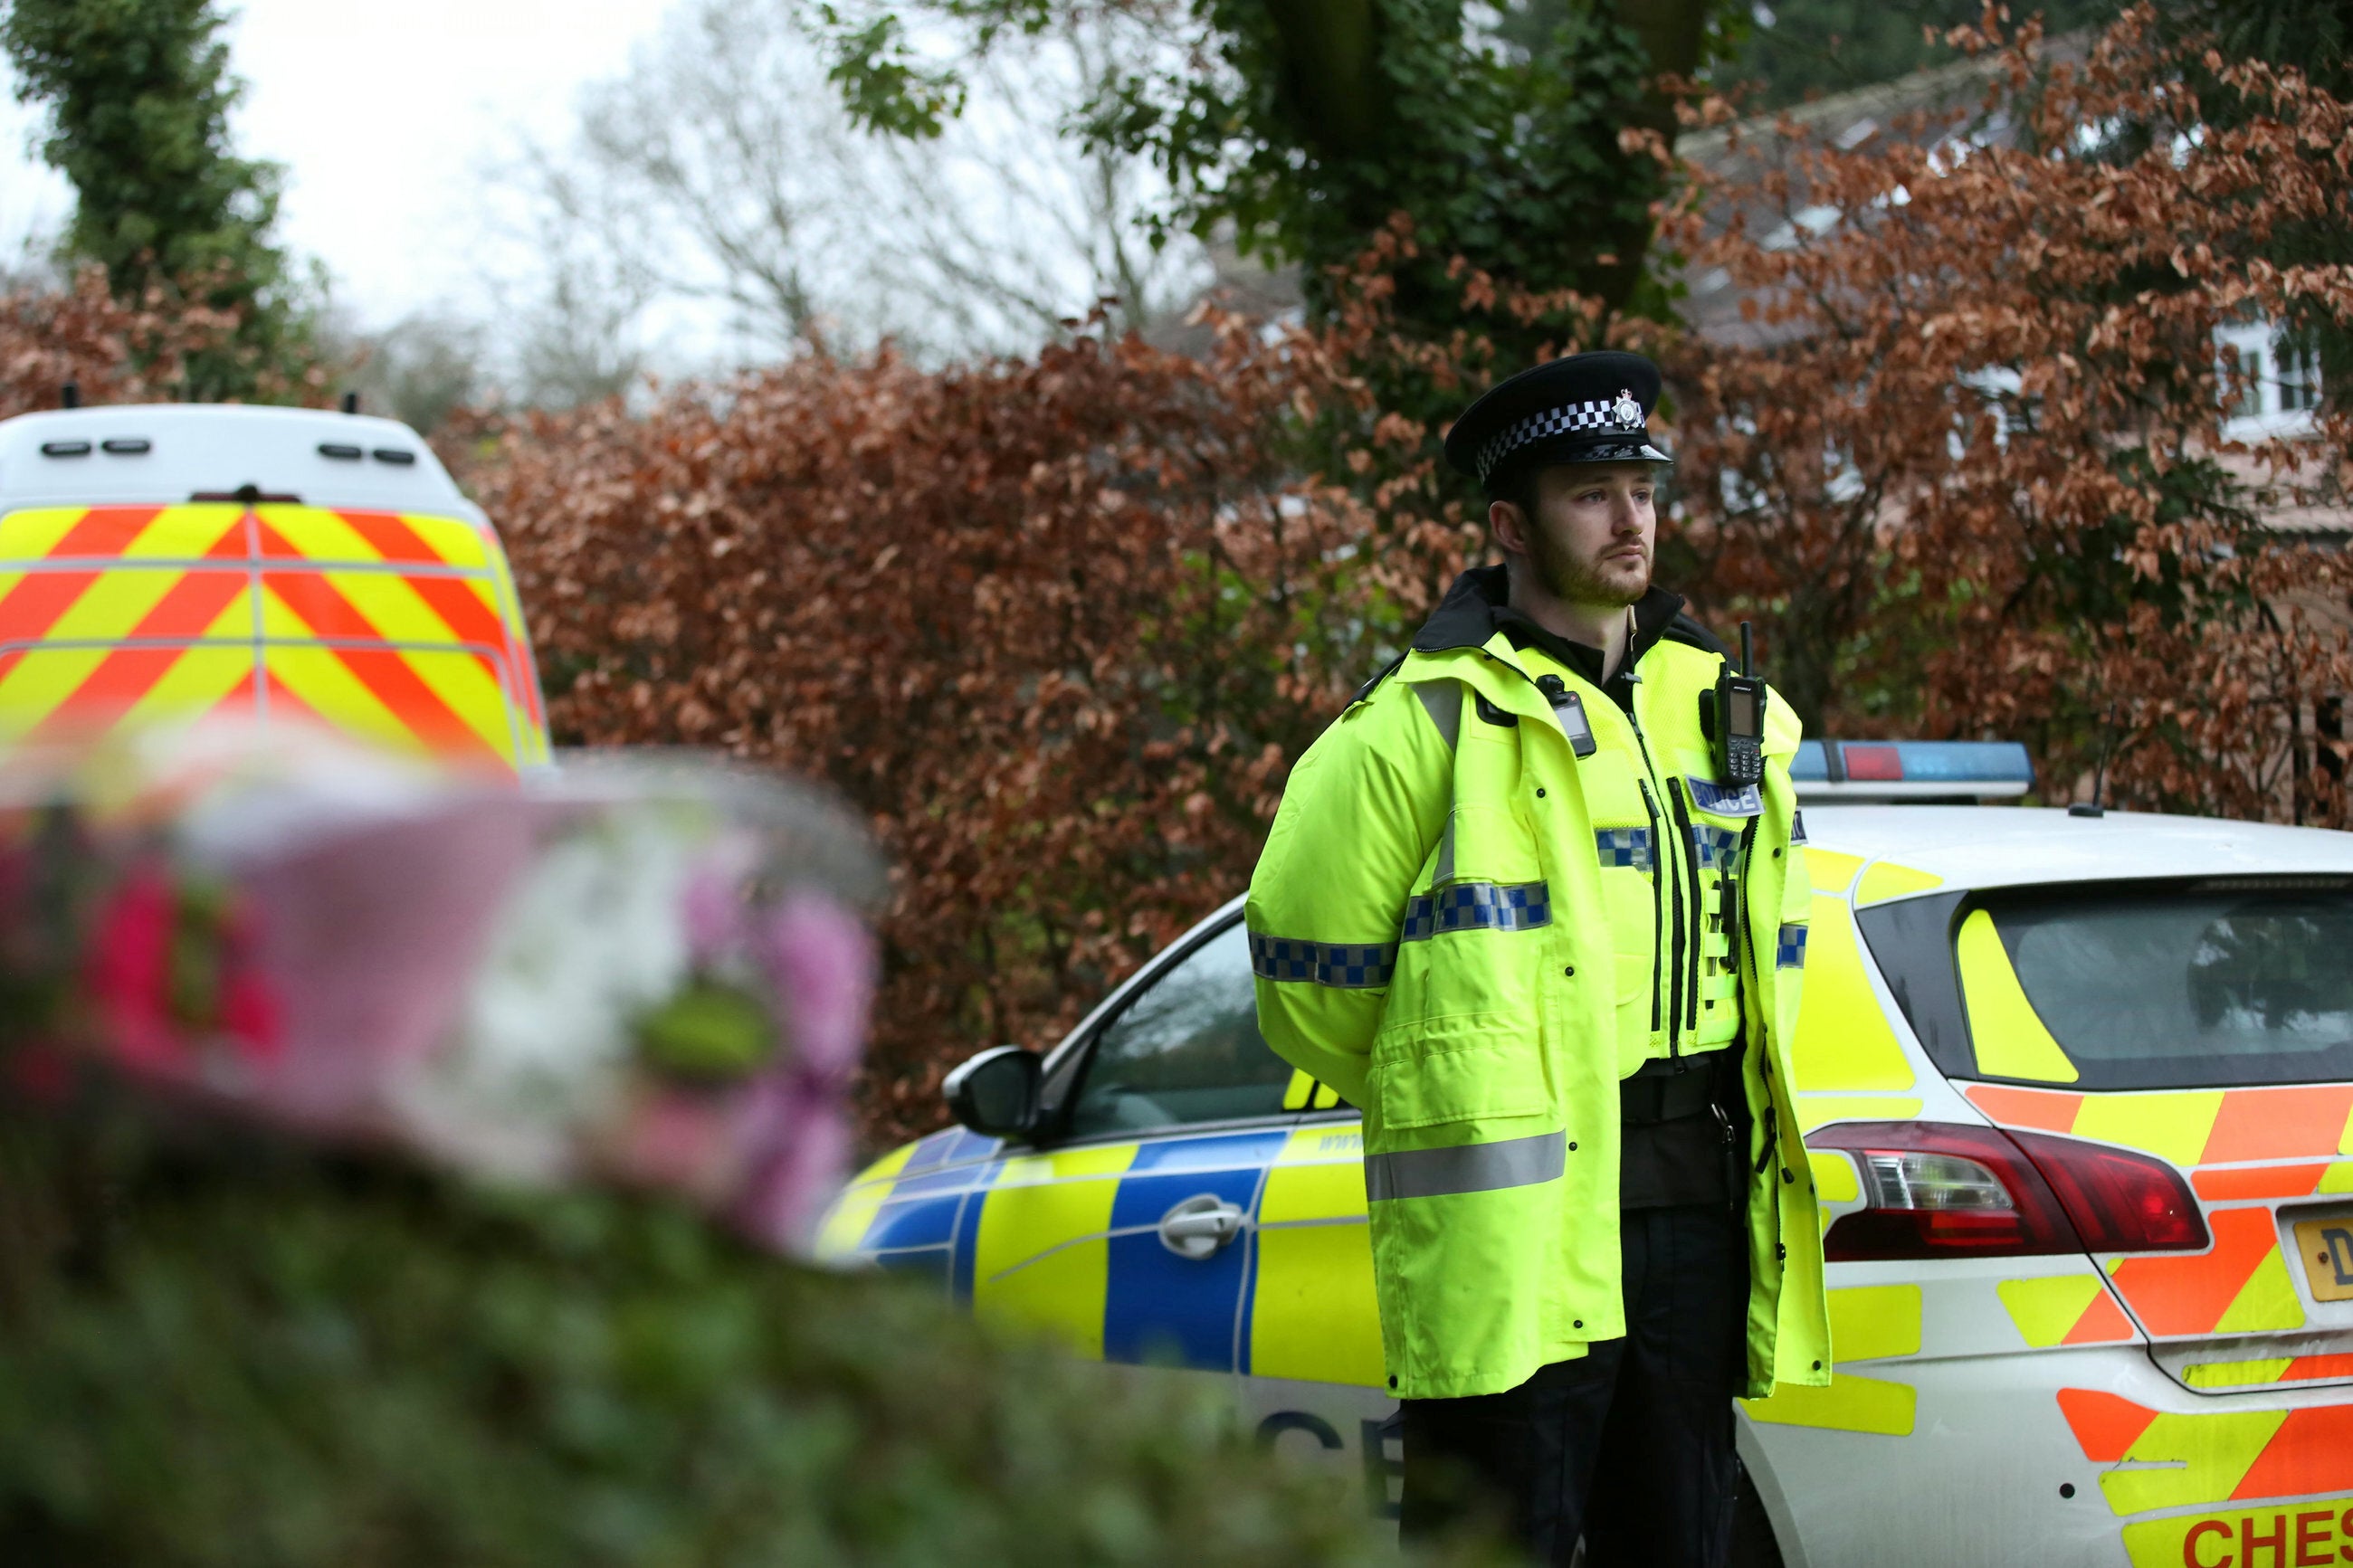 Police on the scene in Culcheth where 16-year-old Brianna Ghey was found fatally stabbed